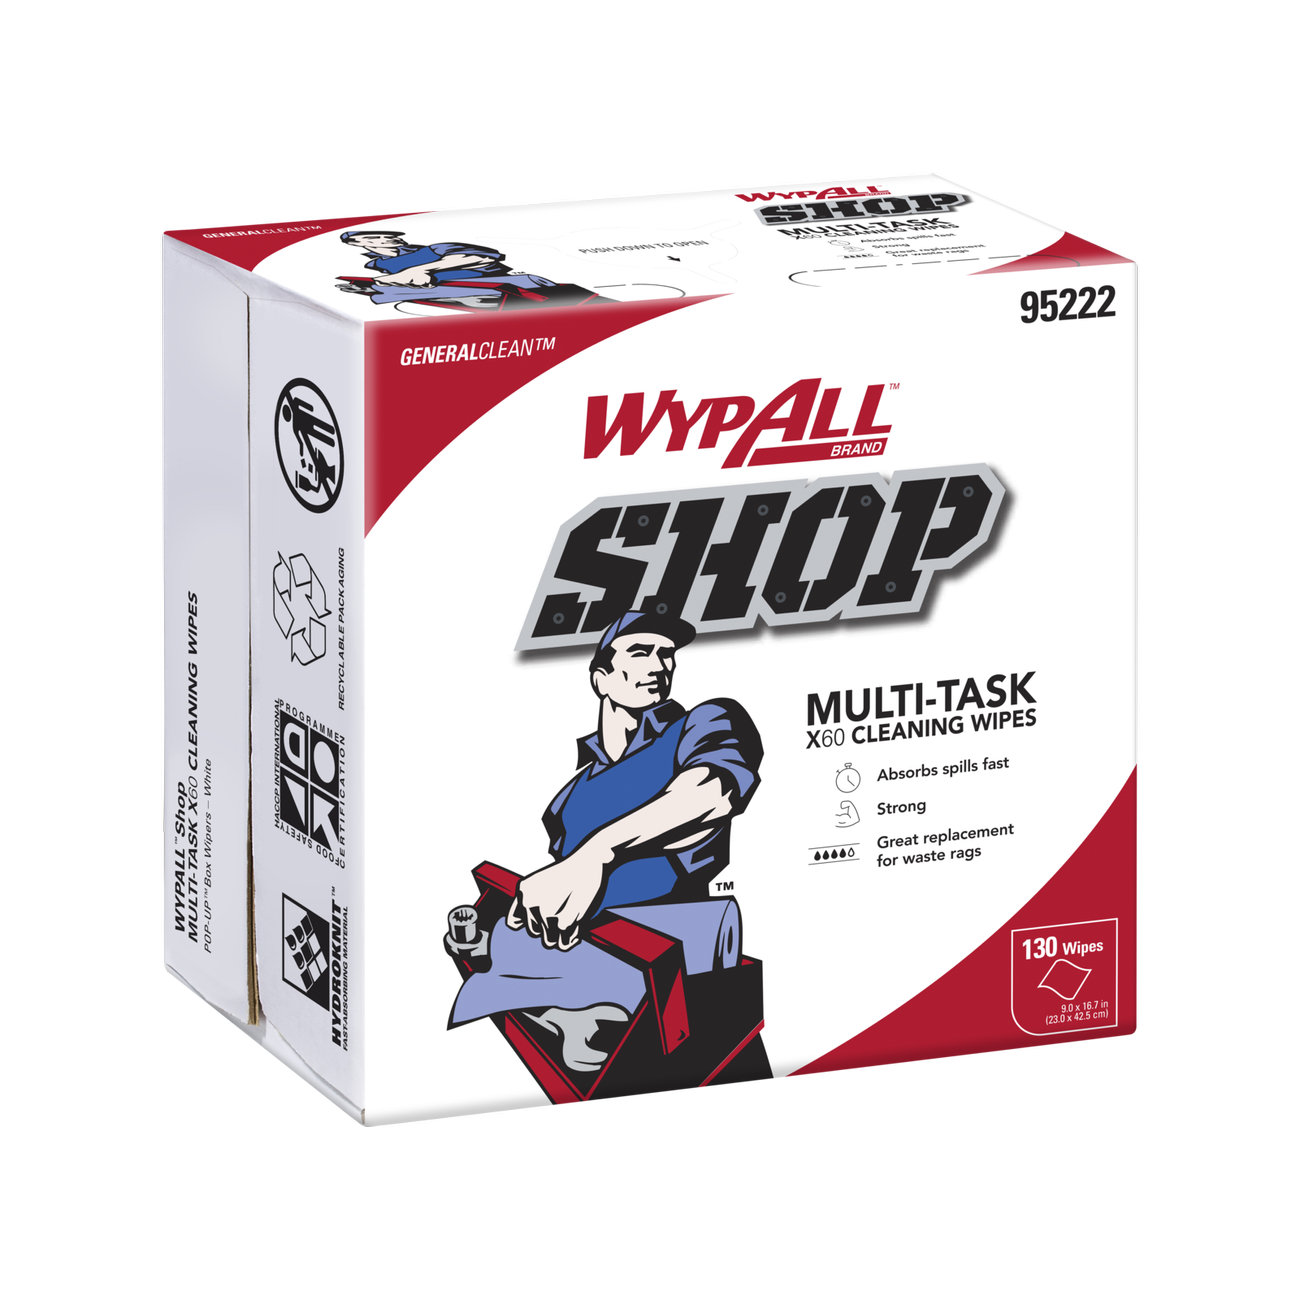 WYPALL® SHOP Multi-task X60 Cleaning Wipes (95222), White, Pop-Up Dispenser Box (130 Wipes/Box, 10 Boxes/Case, 1,300 Wipes/Case) - S062741010